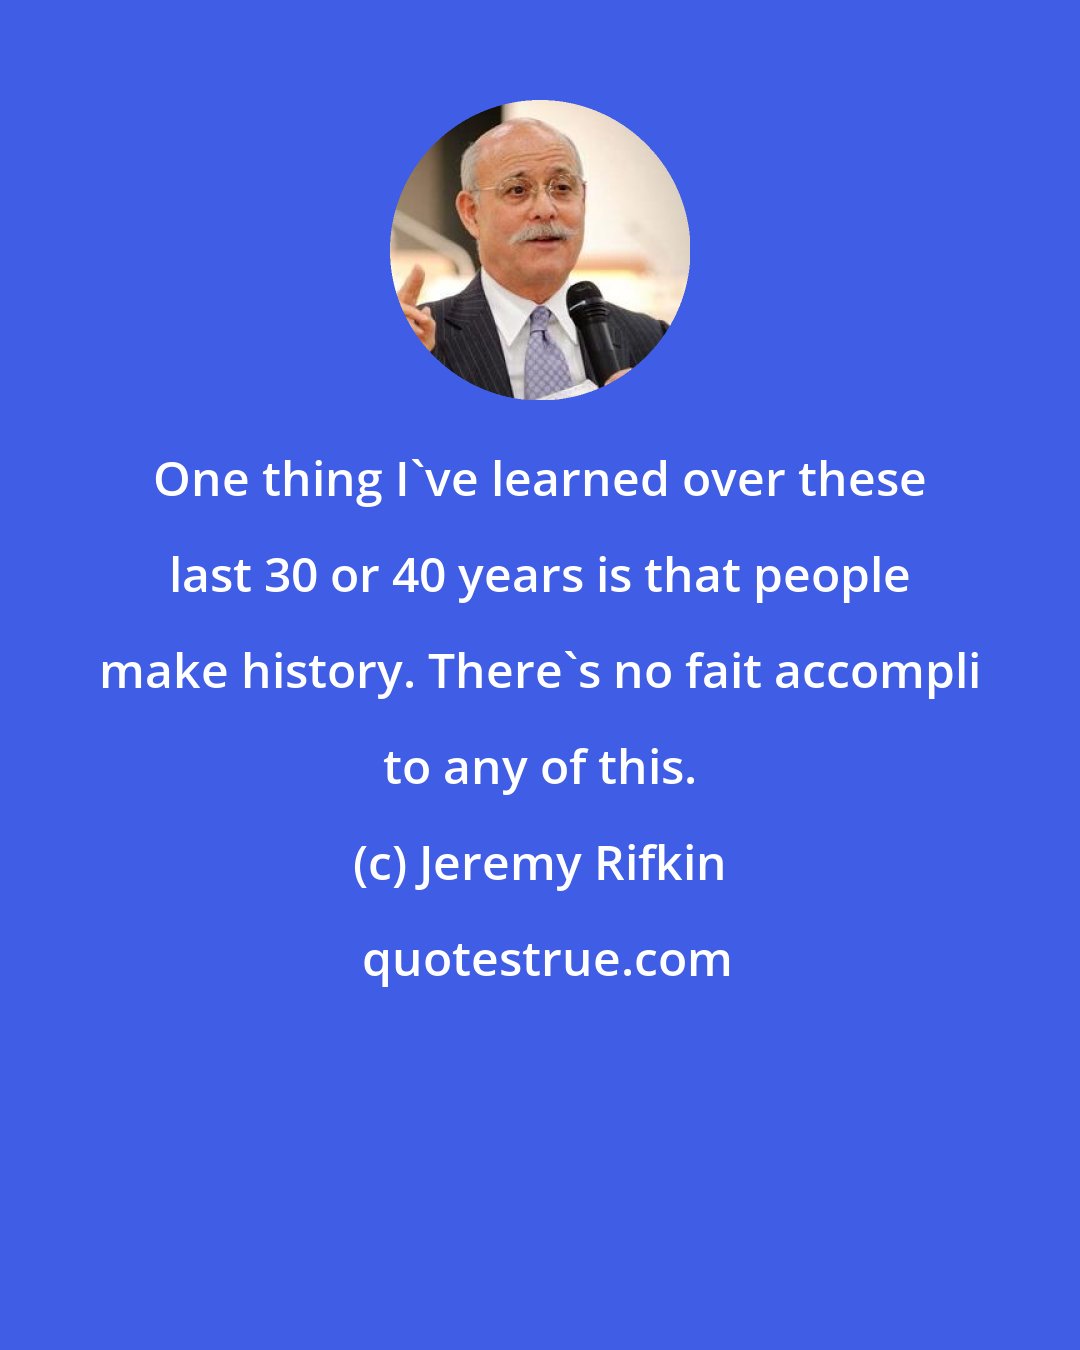 Jeremy Rifkin: One thing I've learned over these last 30 or 40 years is that people make history. There's no fait accompli to any of this.